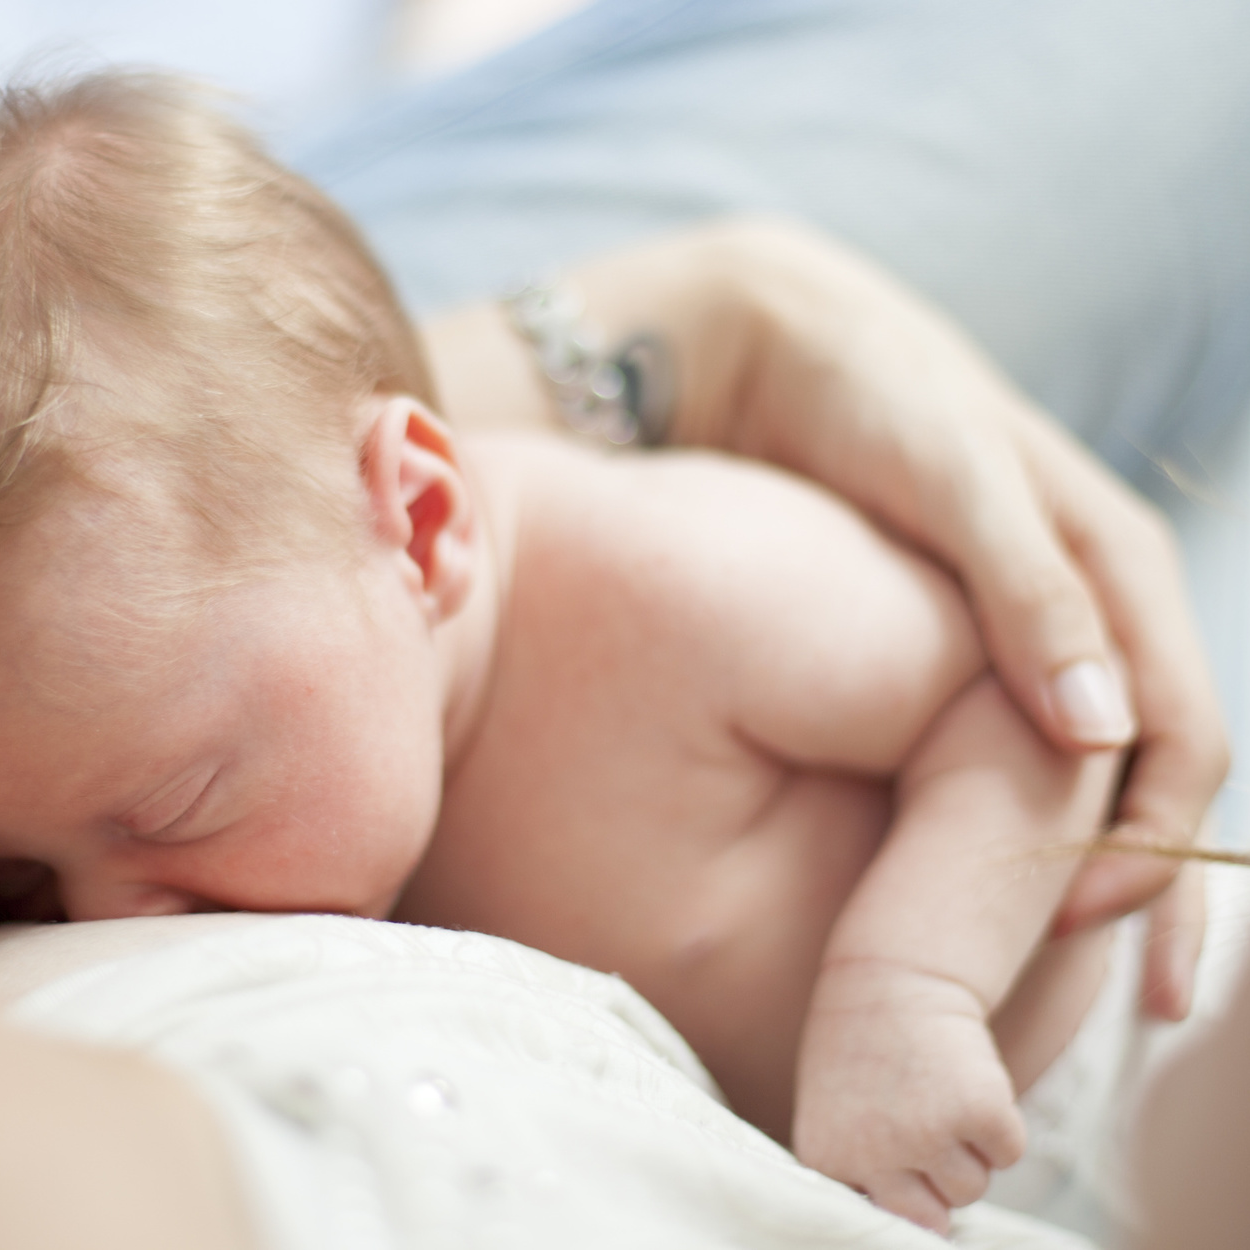 Breastfeed Inc. Personal Lactation Consulting and Breastfeeding Products